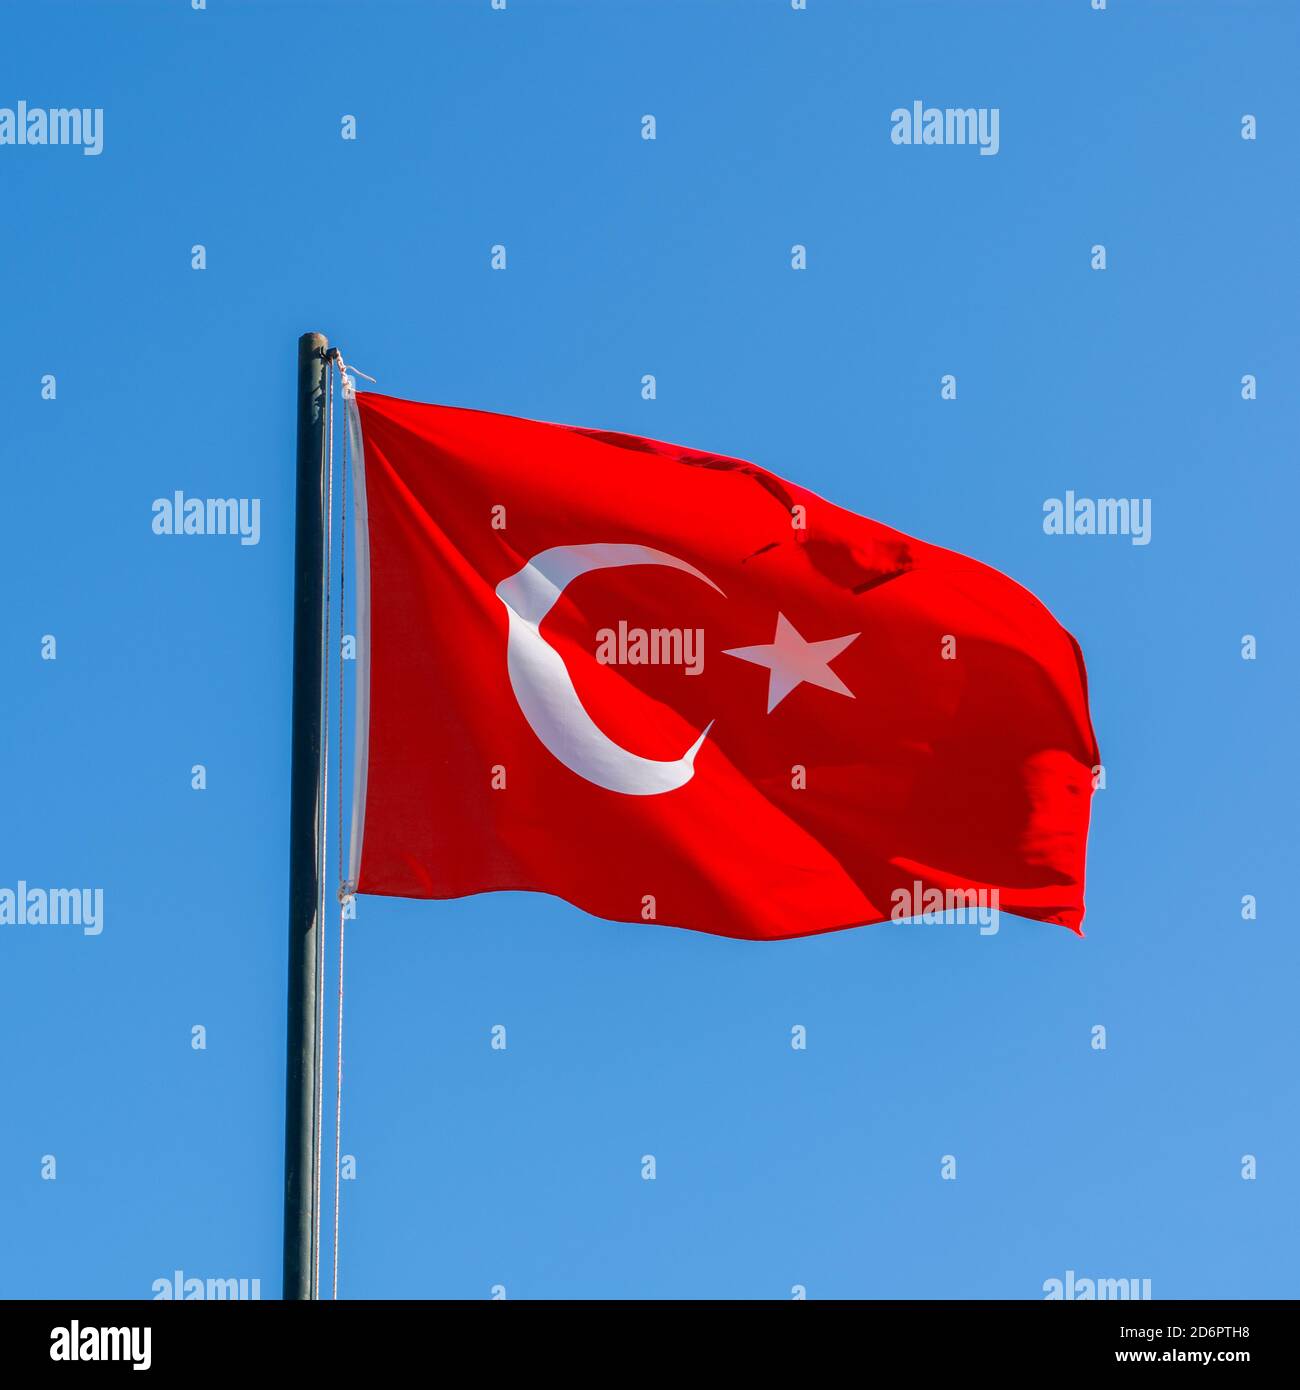 Turkish flag. national flag of Turkey. Flag of Turkey rise waving to the wind with sky in the background. concept of tourism and politics, close up. Stock Photo